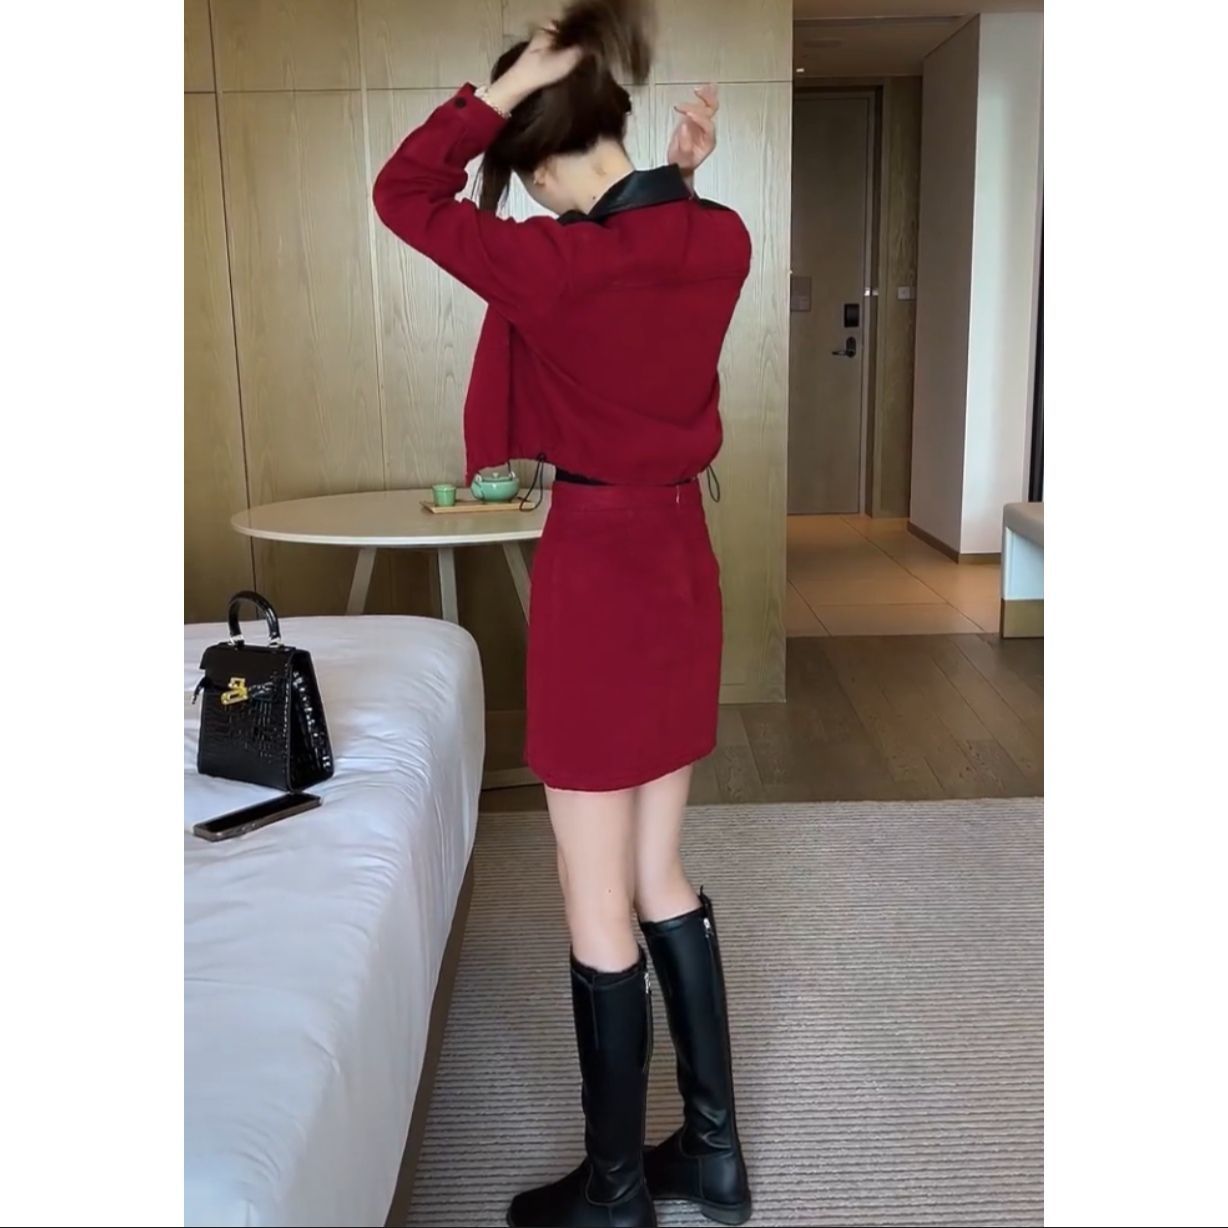 Autumn 2022 New Internet Celebrity Hot Style Small Man Looks Slim Fashionable All-match Age-reducing Suit Design Two-piece Female Set [Will be released on December 31]